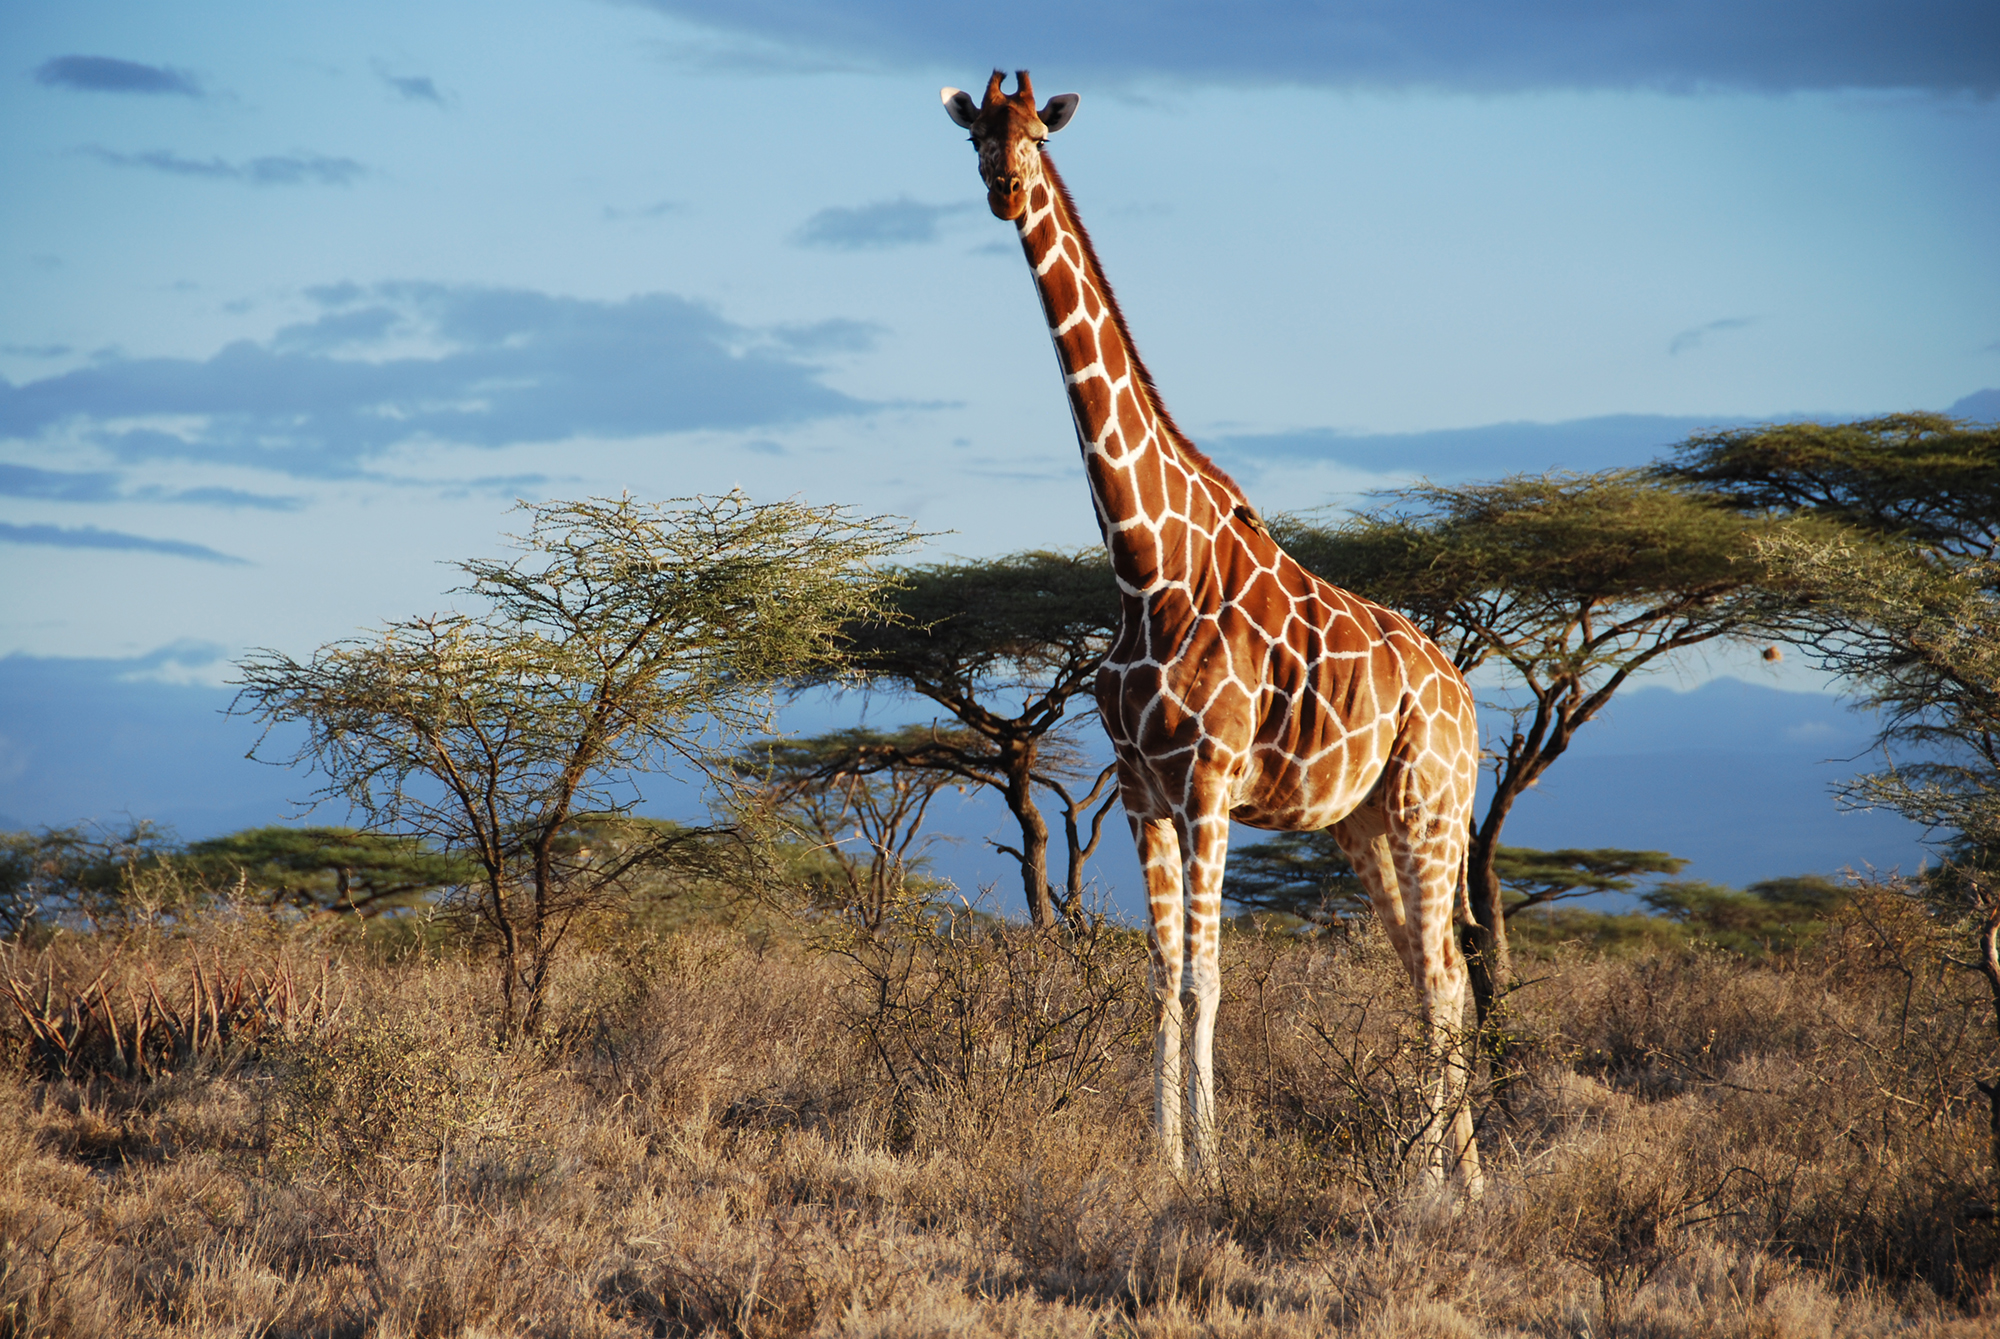 Genetic Analysis Uncovers Four Species of Giraffe, Not Just One